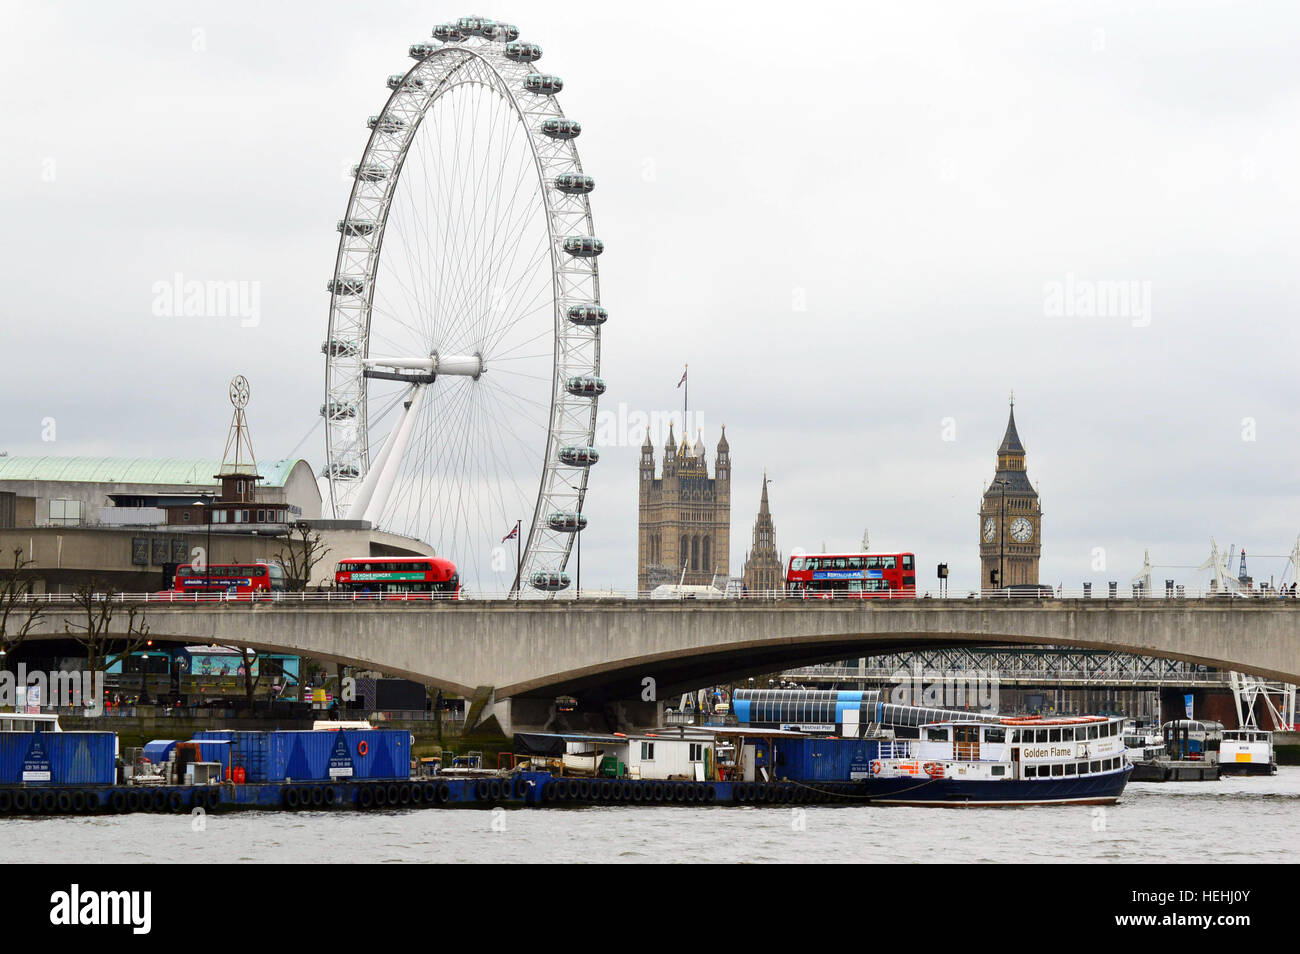 London: Big Ben, red buses and London eye. Landscape view of Westminster bridge seen from the opposite bank of the River Thames Stock Photo